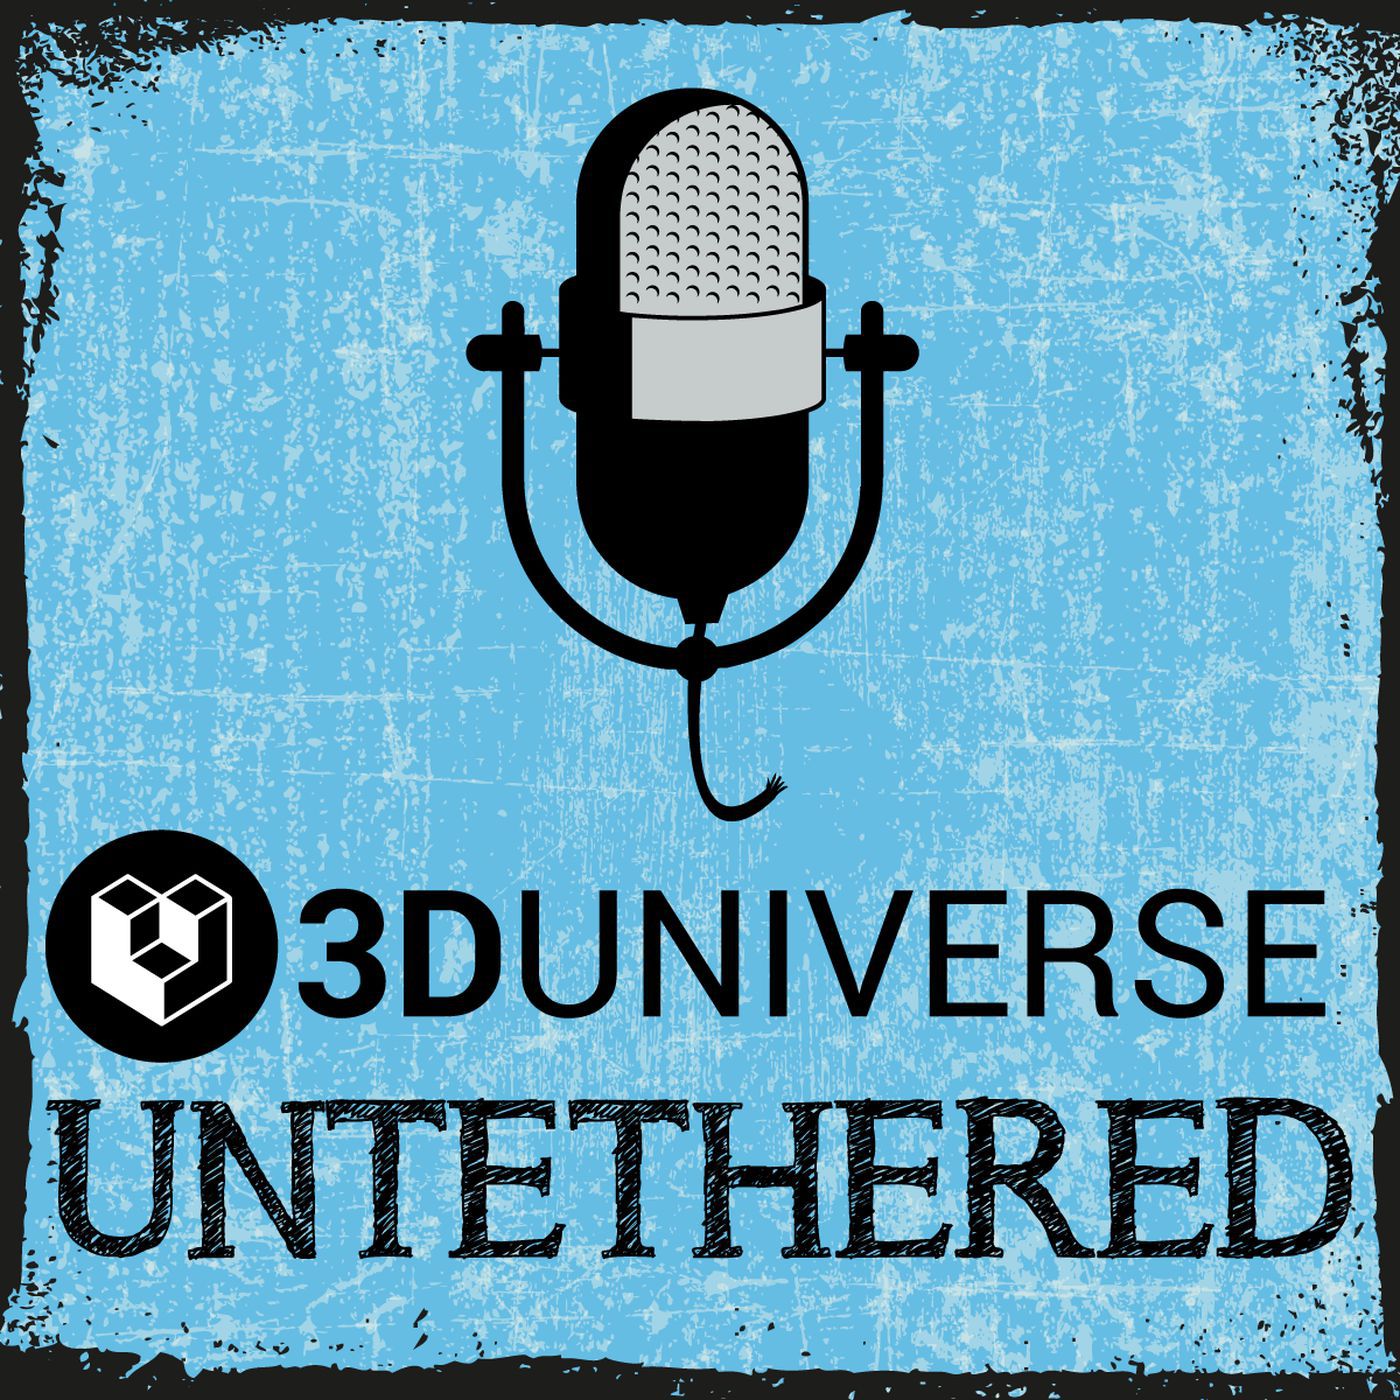 3D Universe Untethered